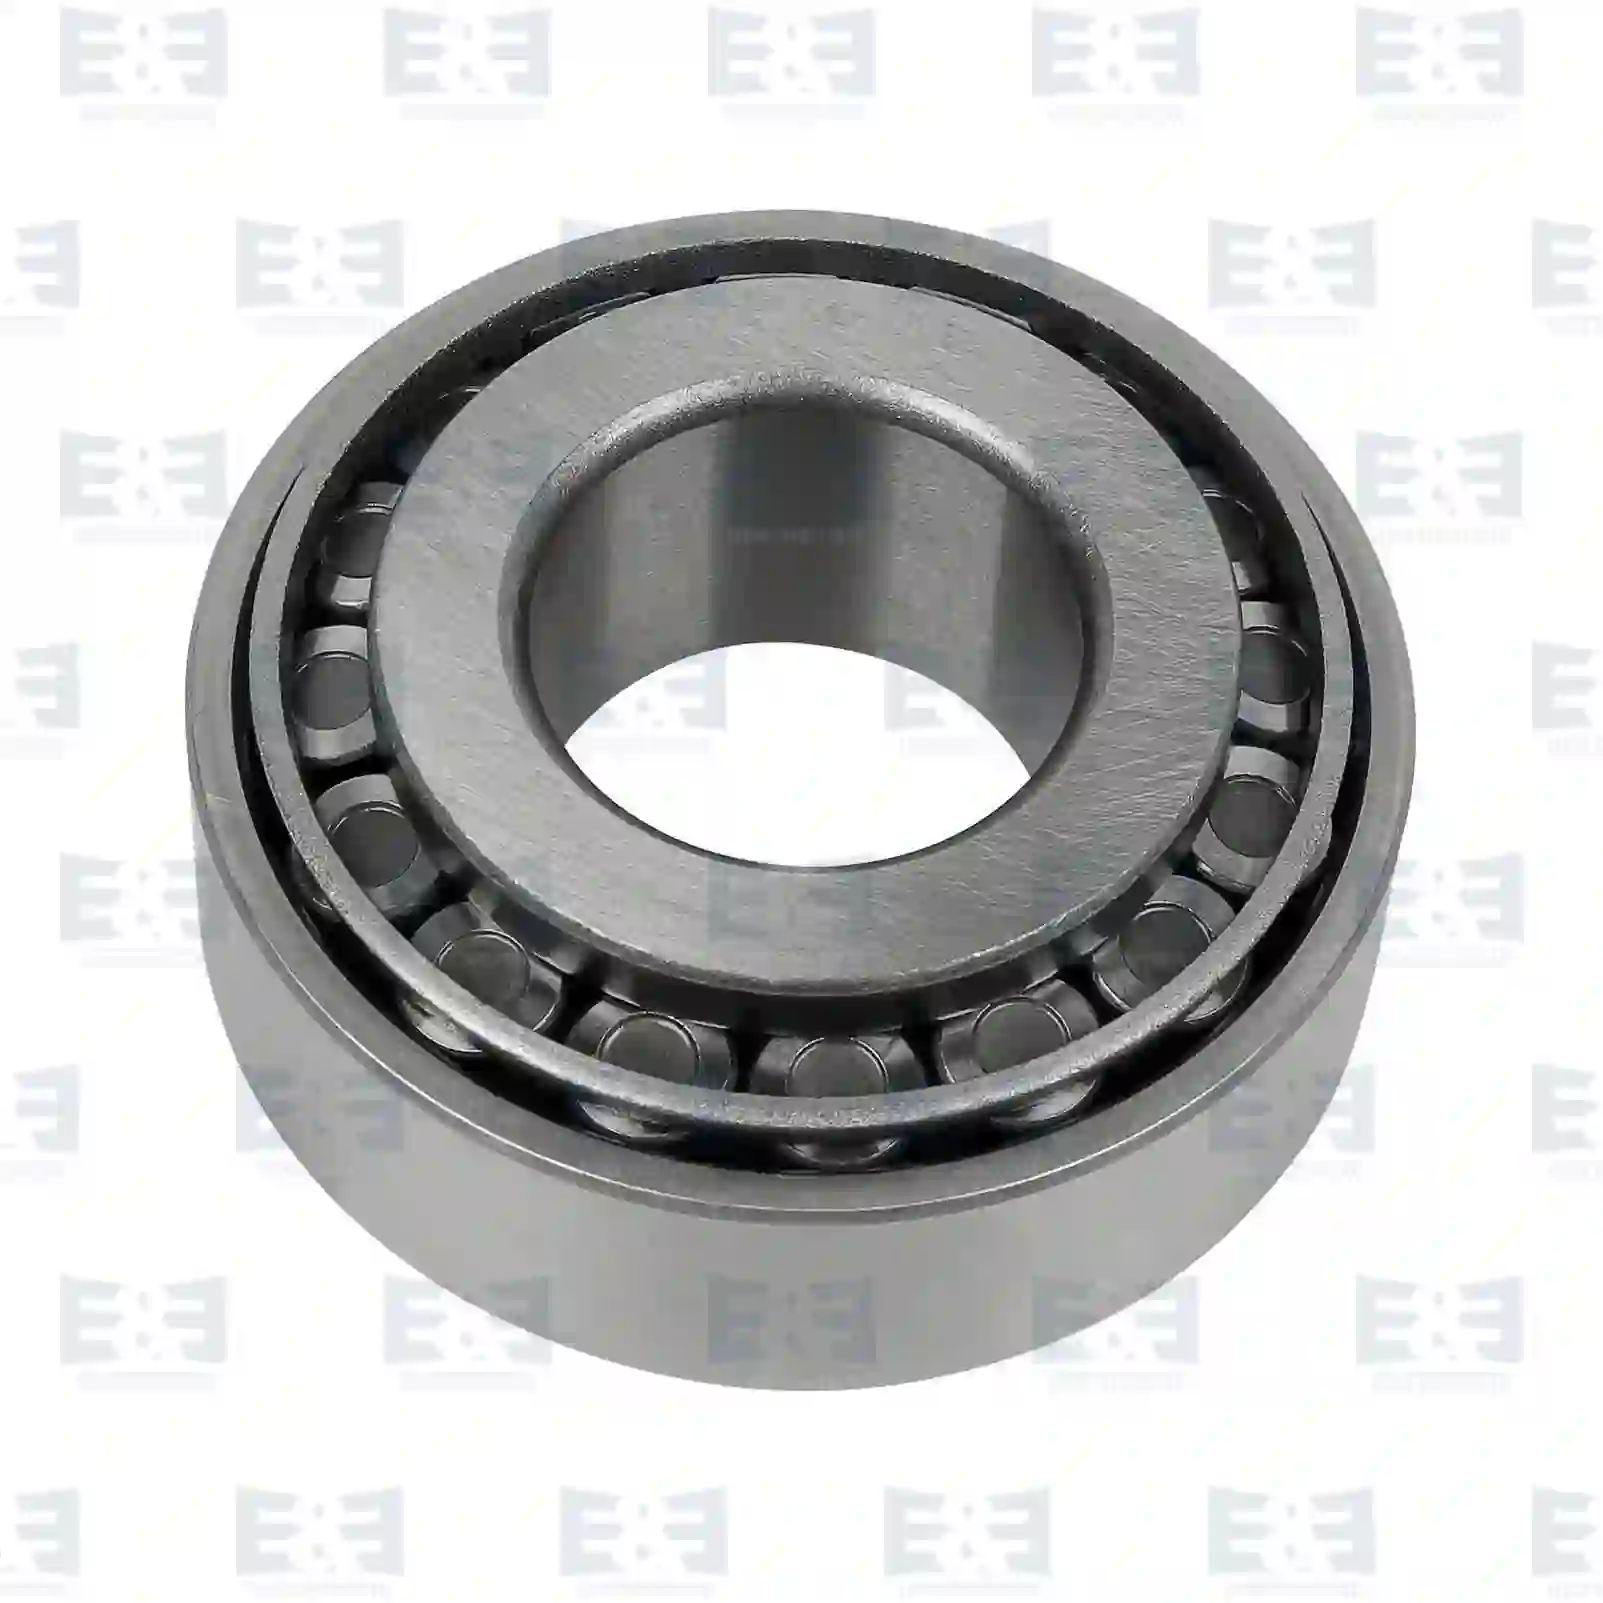 King Pin Kit Tapered roller bearing, EE No 2E2270827 ,  oem no:26800580, 01126887, 02049337, 07164503, 26800580, 06324990015, 34934200000, 87523400600, A0857596100, 0029816305, 0029816405, 2576334031, 38120-76500, 14698, 181669, 1911816, 322747, 11074, 181668, 181669 E&E Truck Spare Parts | Truck Spare Parts, Auotomotive Spare Parts